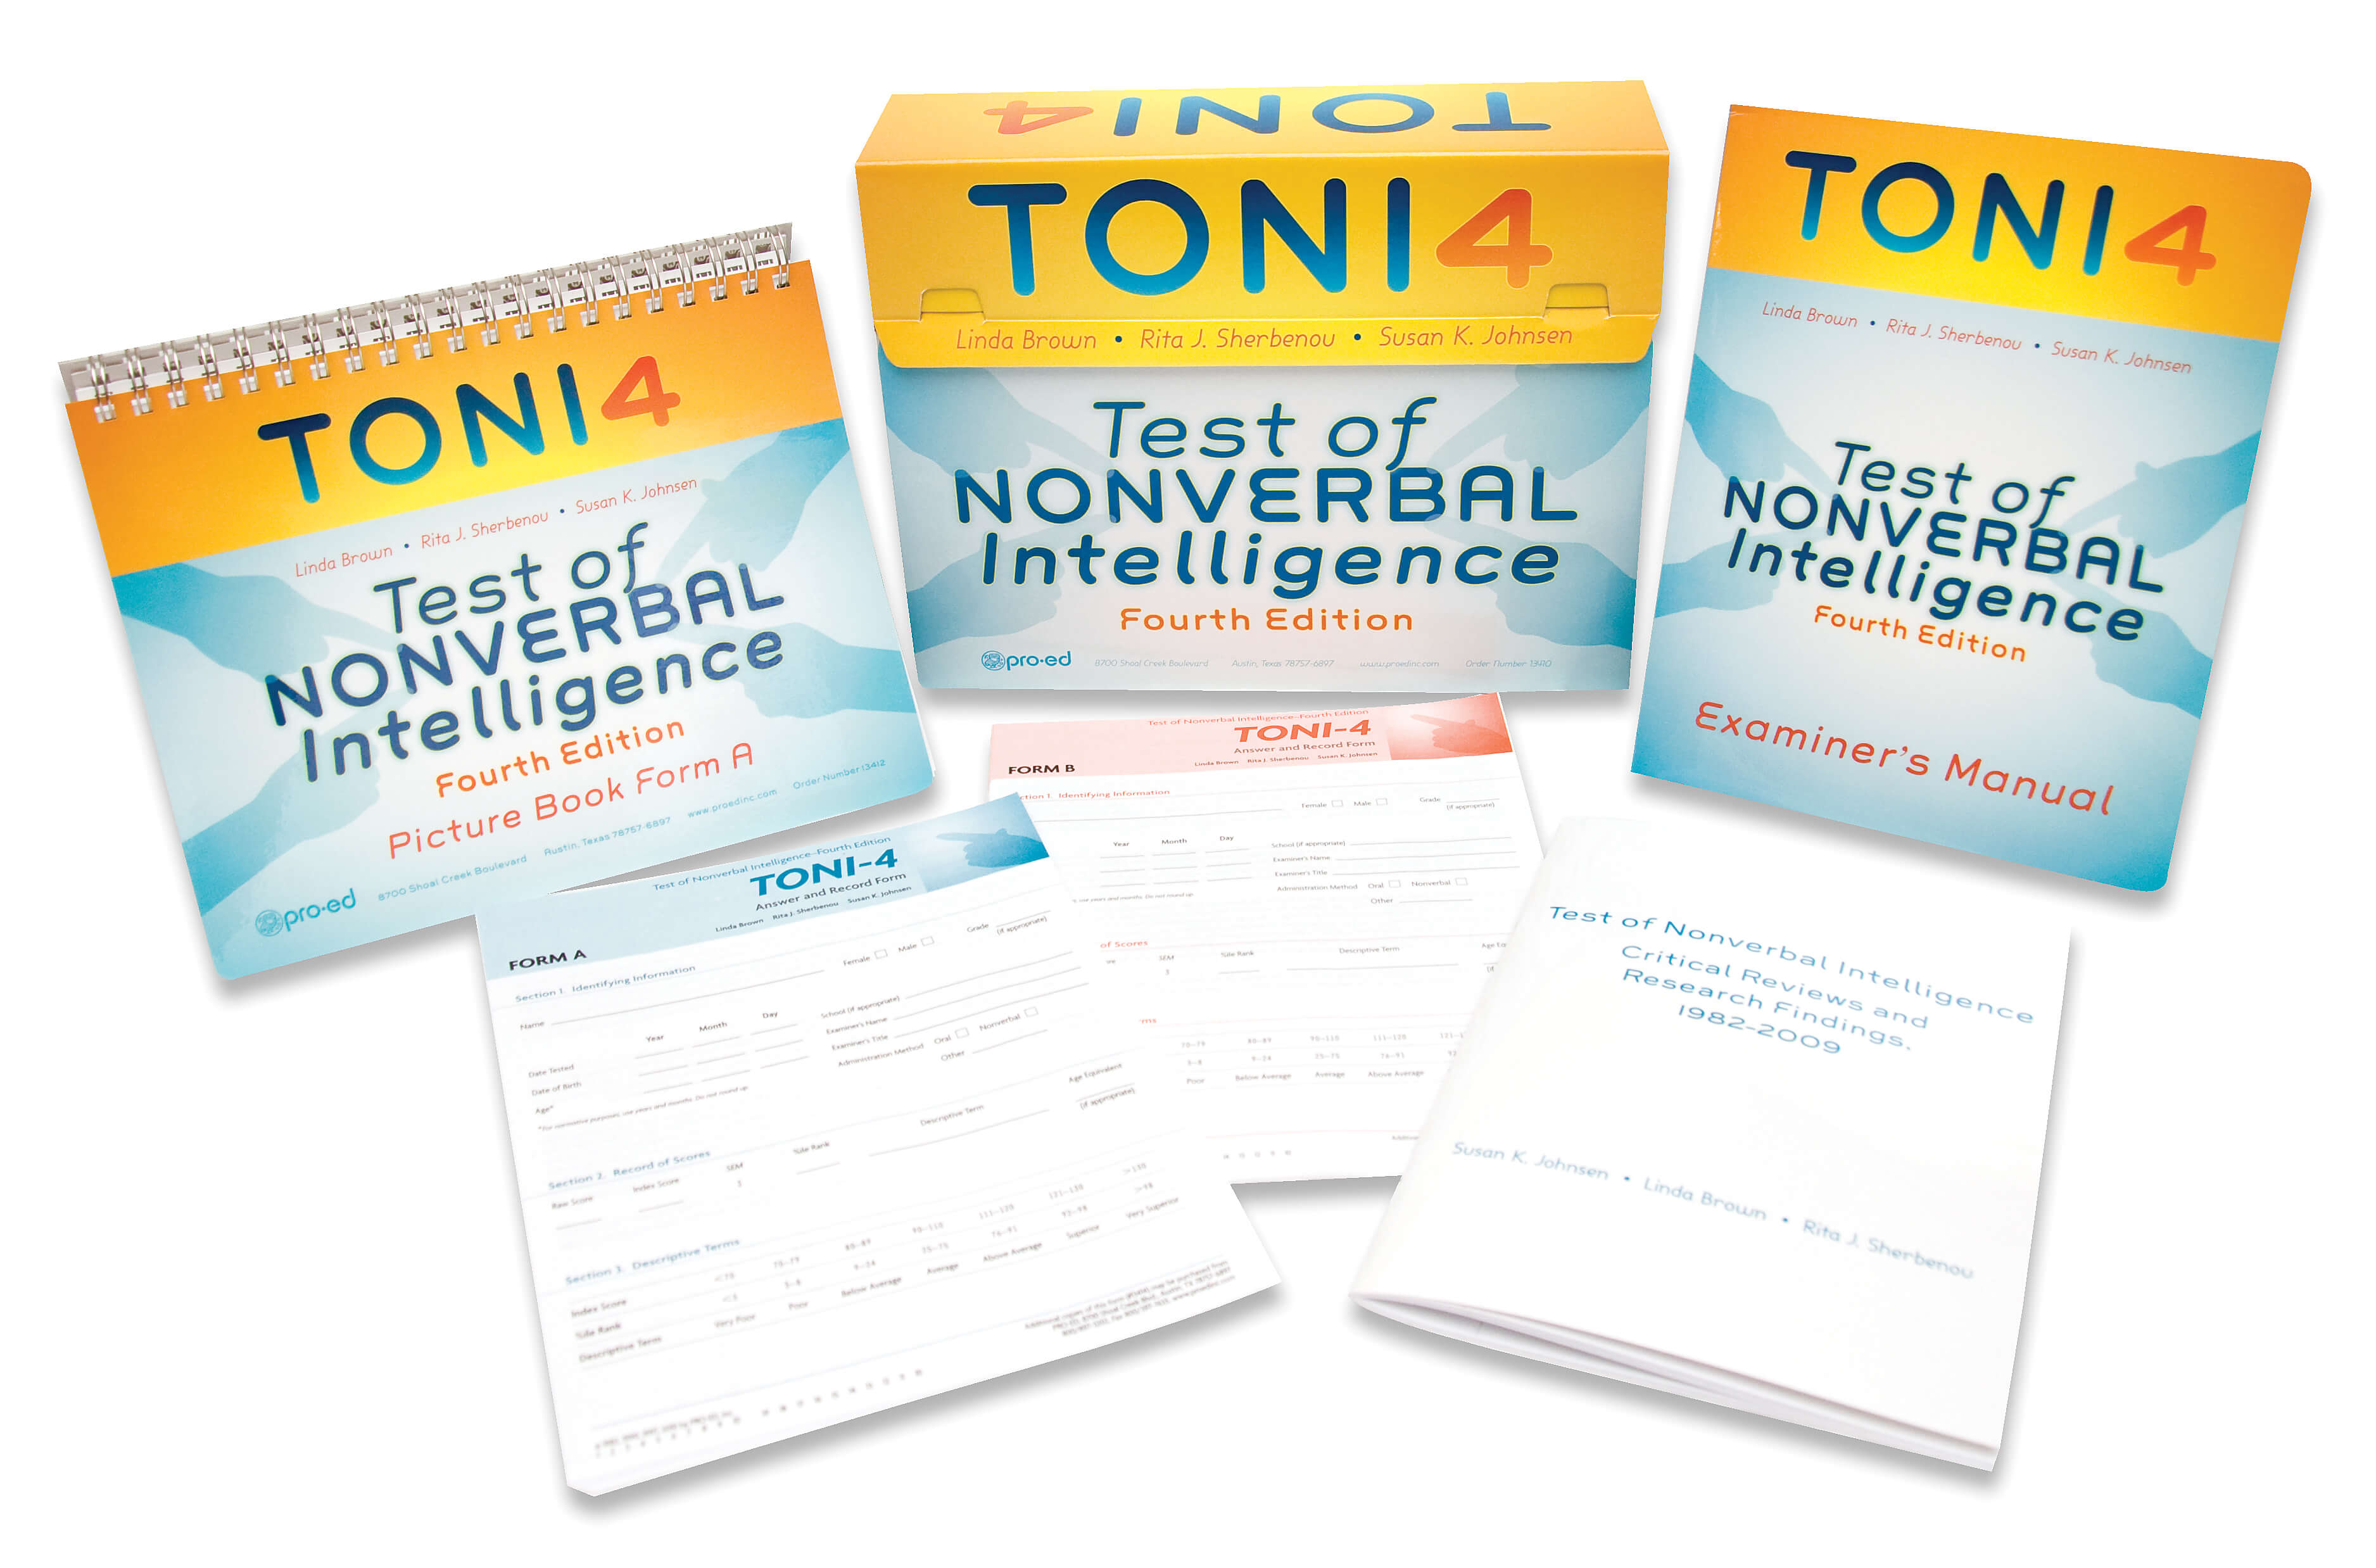 TONI-4: Test of Nonverbal Intelligence 4th Edition - 